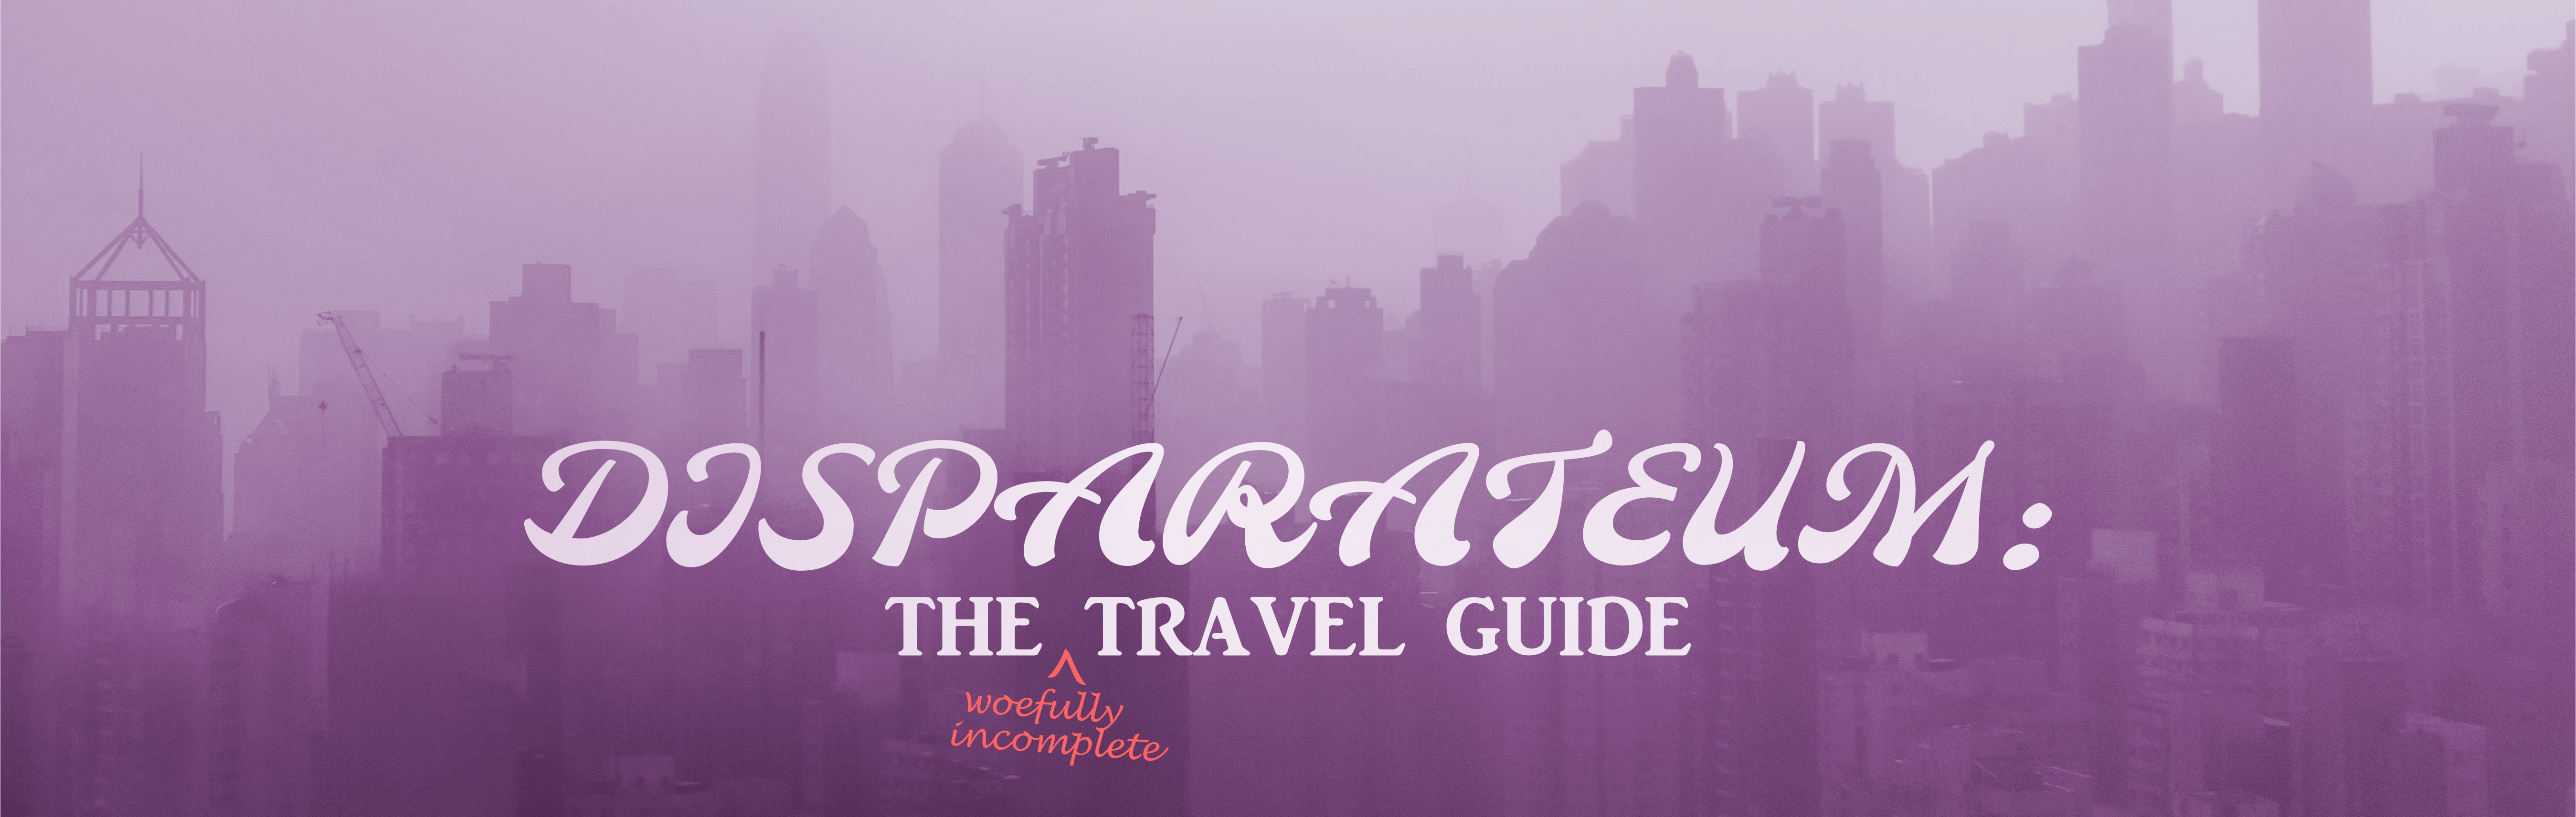 DISPARATEUM: The Travel Guide